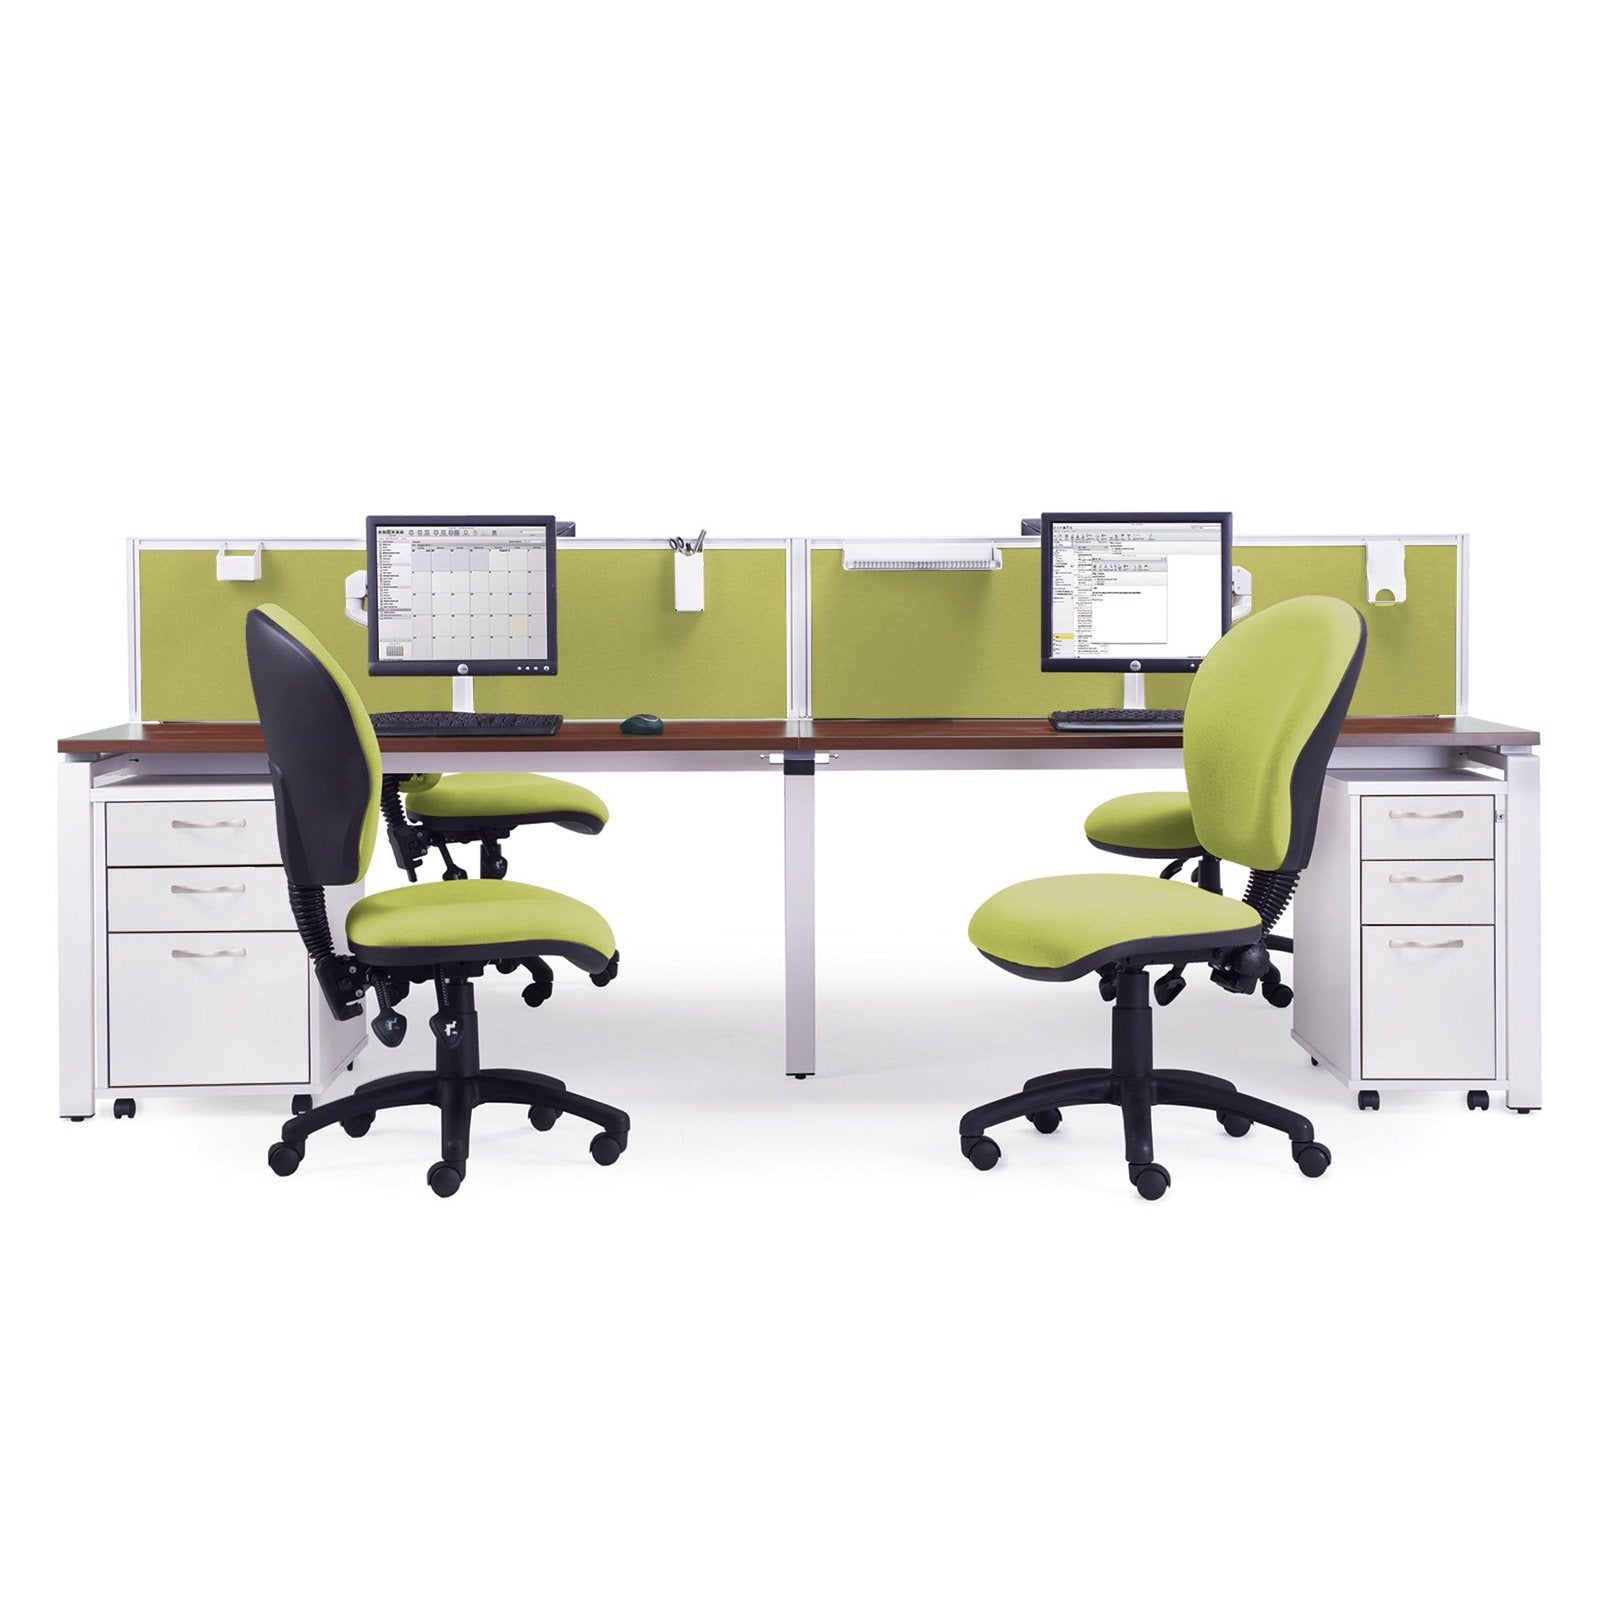 Adapt add on unit single 1600 deep - Office Products Online